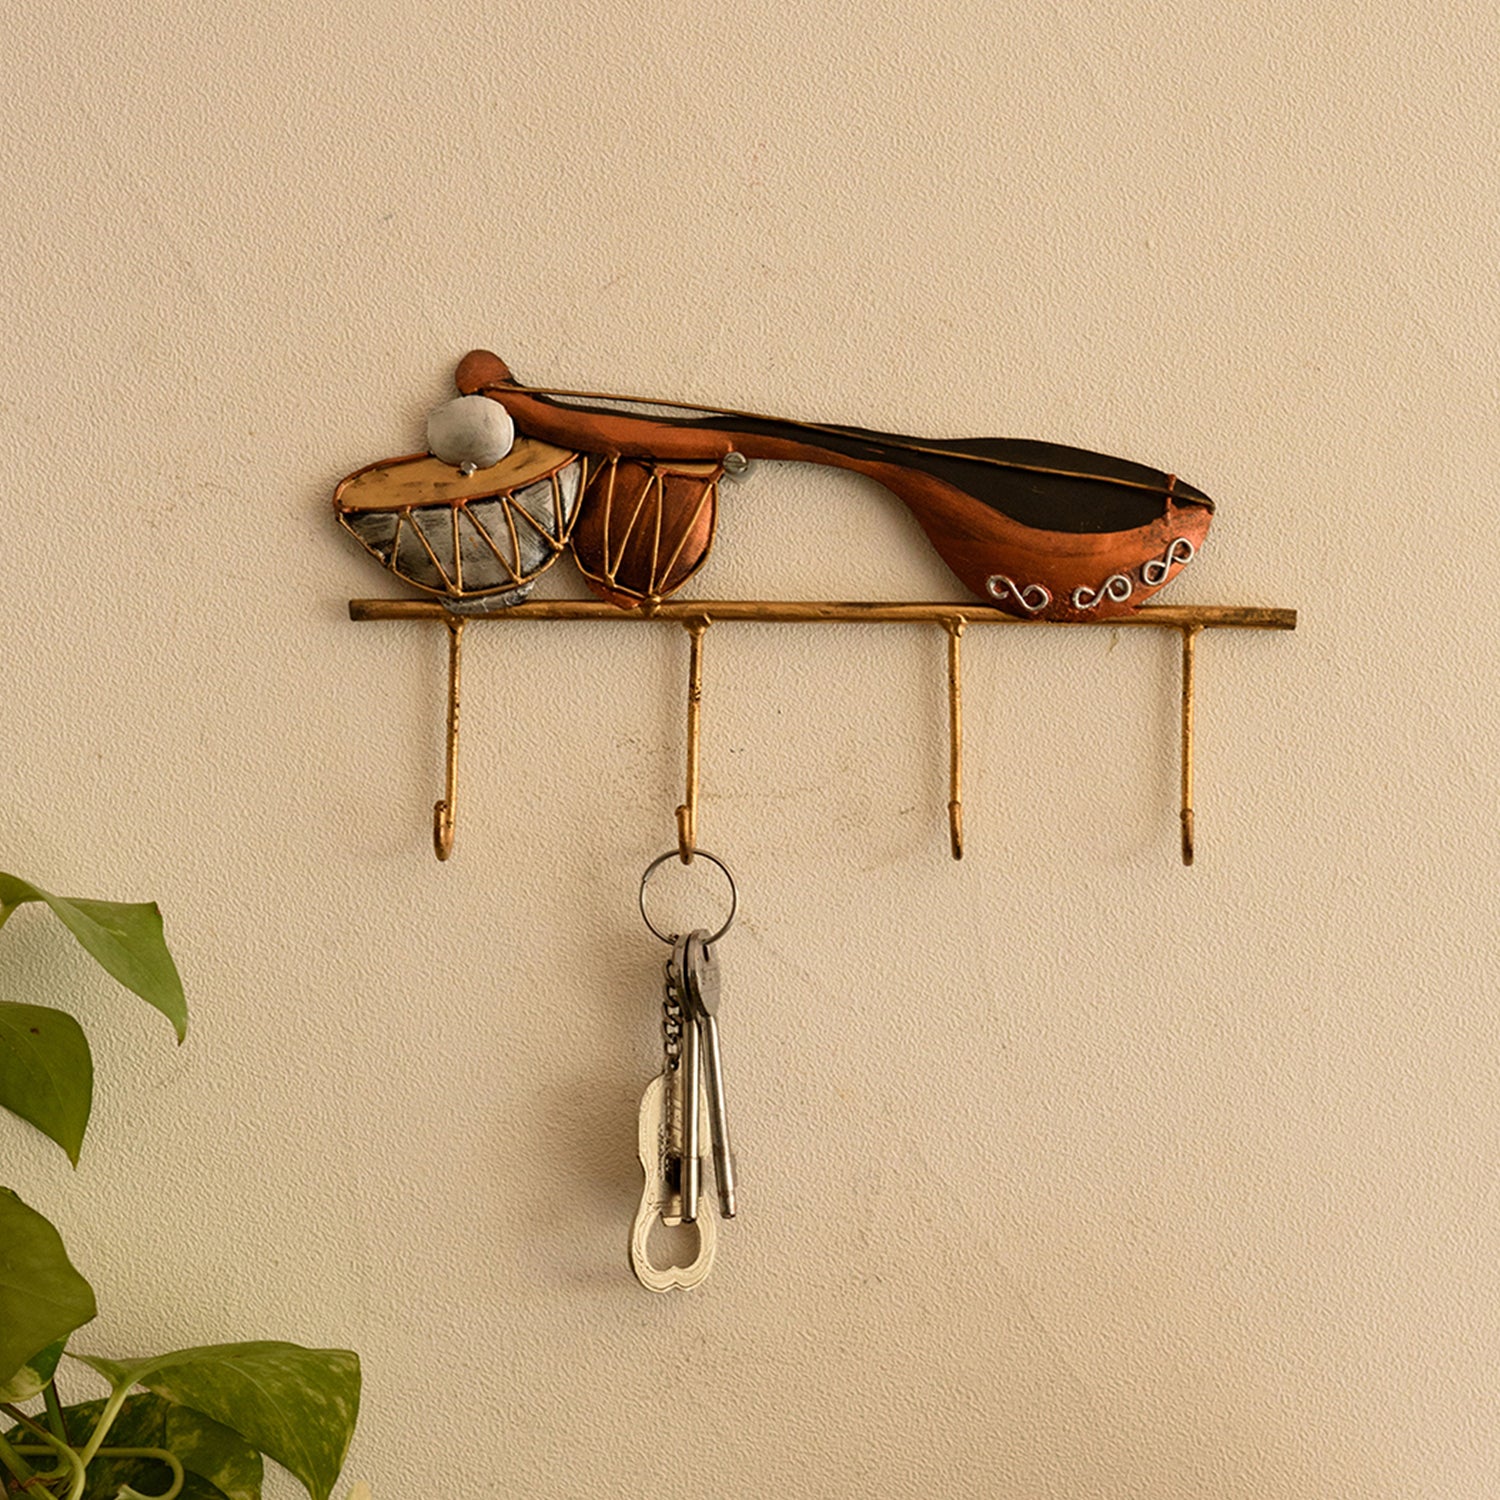 Musical Instruments Wrought Iron Key Holder